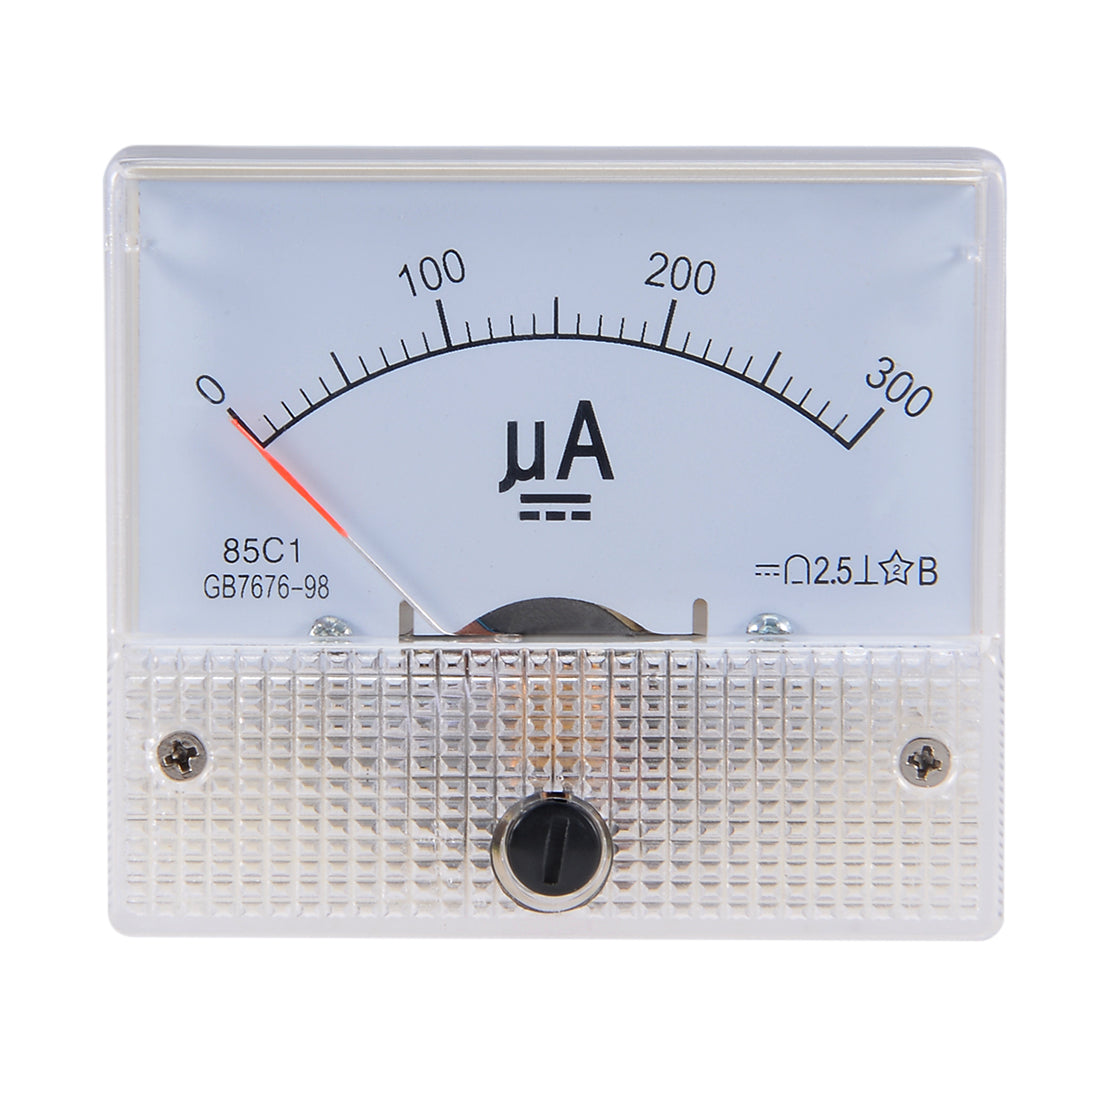 uxcell Uxcell 85C1 Analog Current Panel Meter DC 300uA Ammeter for Circuit Testing Ampere Tester Gauge 1 PCS